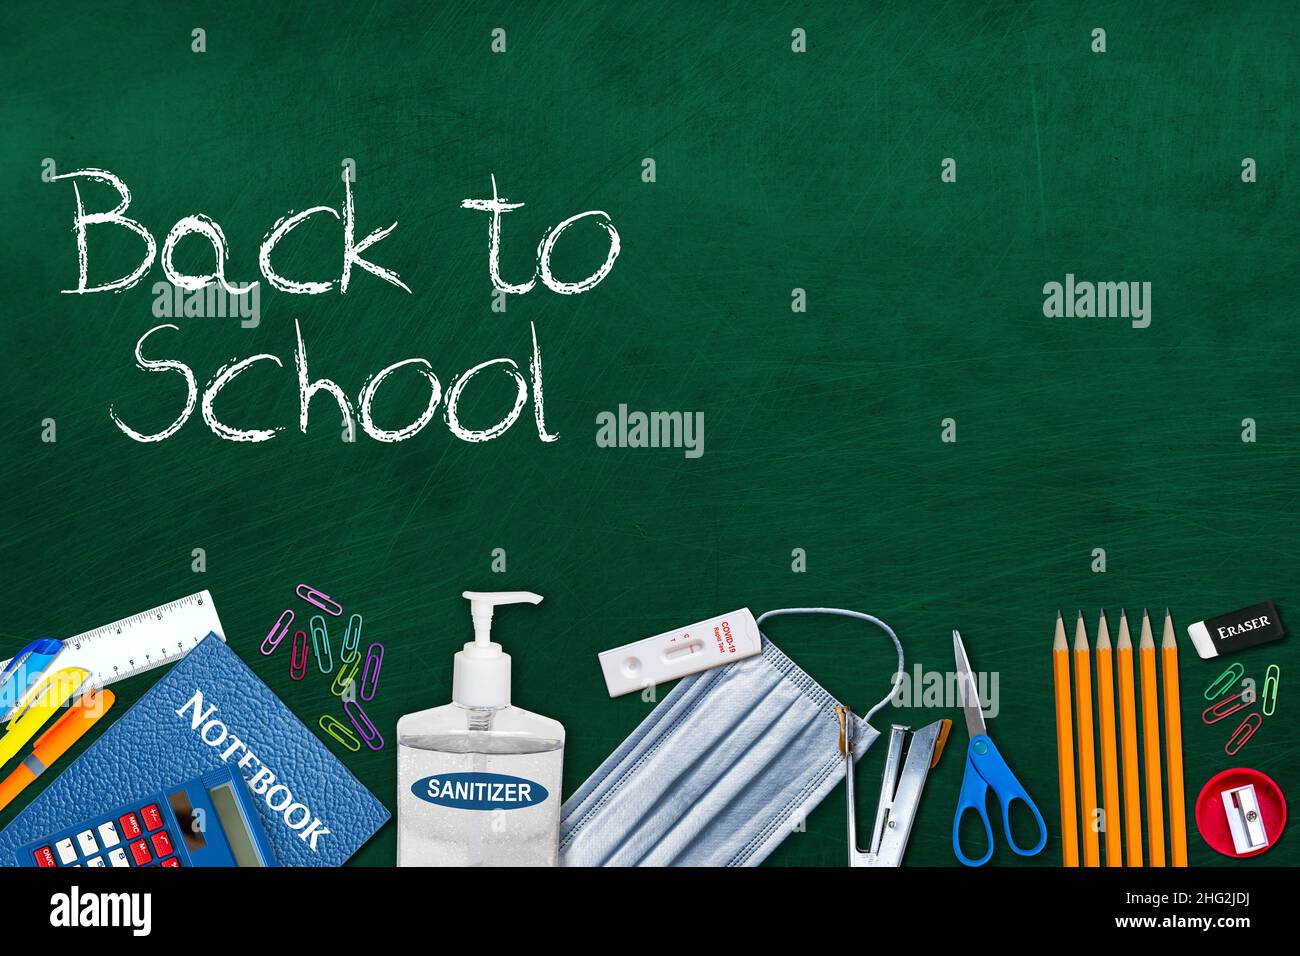 Back to school essentials concept in the new normal during Covid-19 pandemic with rapid test kit, hand sanitizer, face mask and stationery on chalkboa Stock Photo